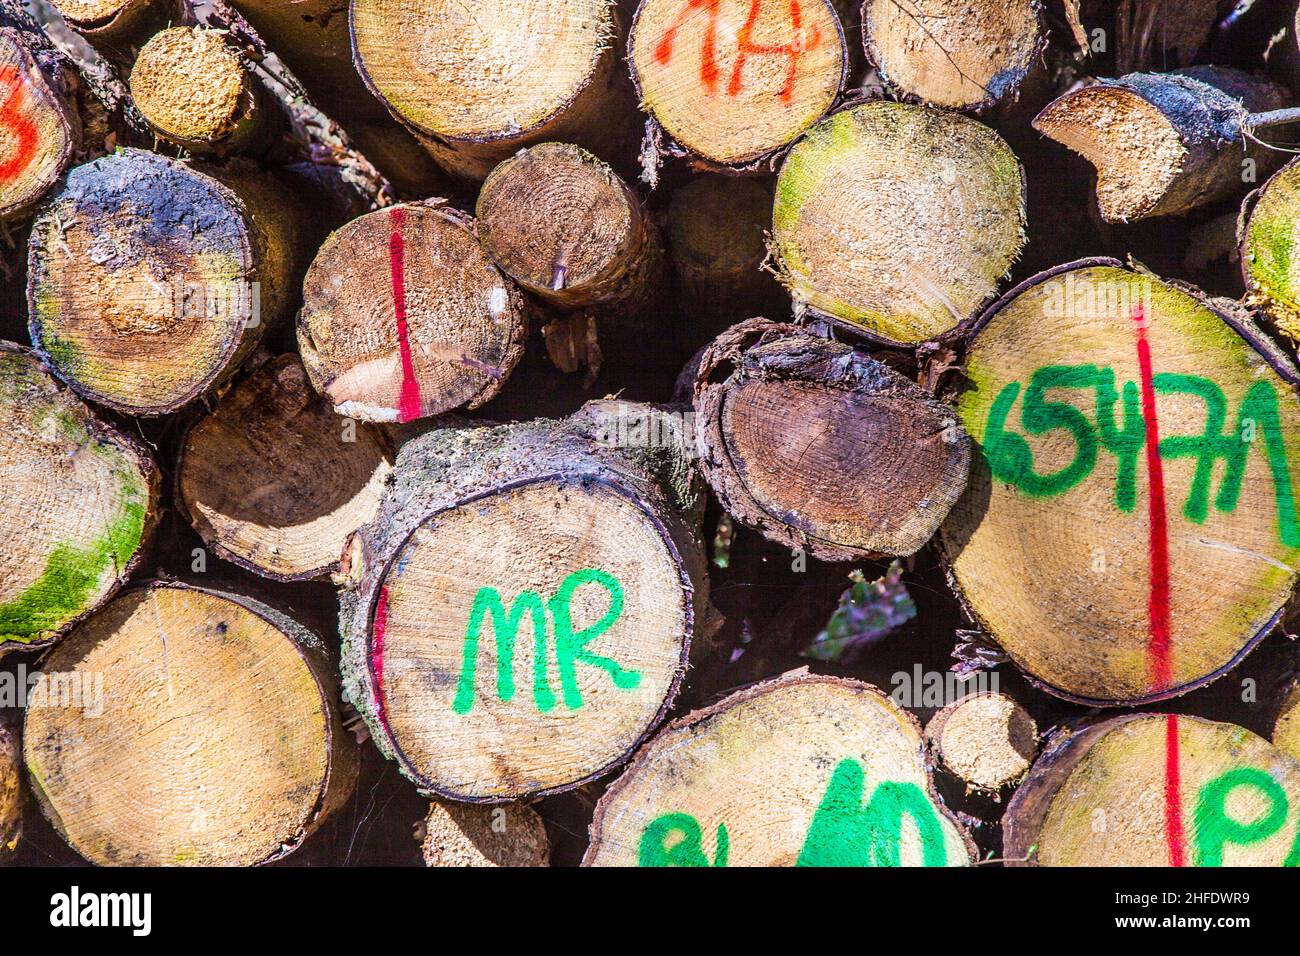 Pile of wood in forest marked with colors Stock Photo